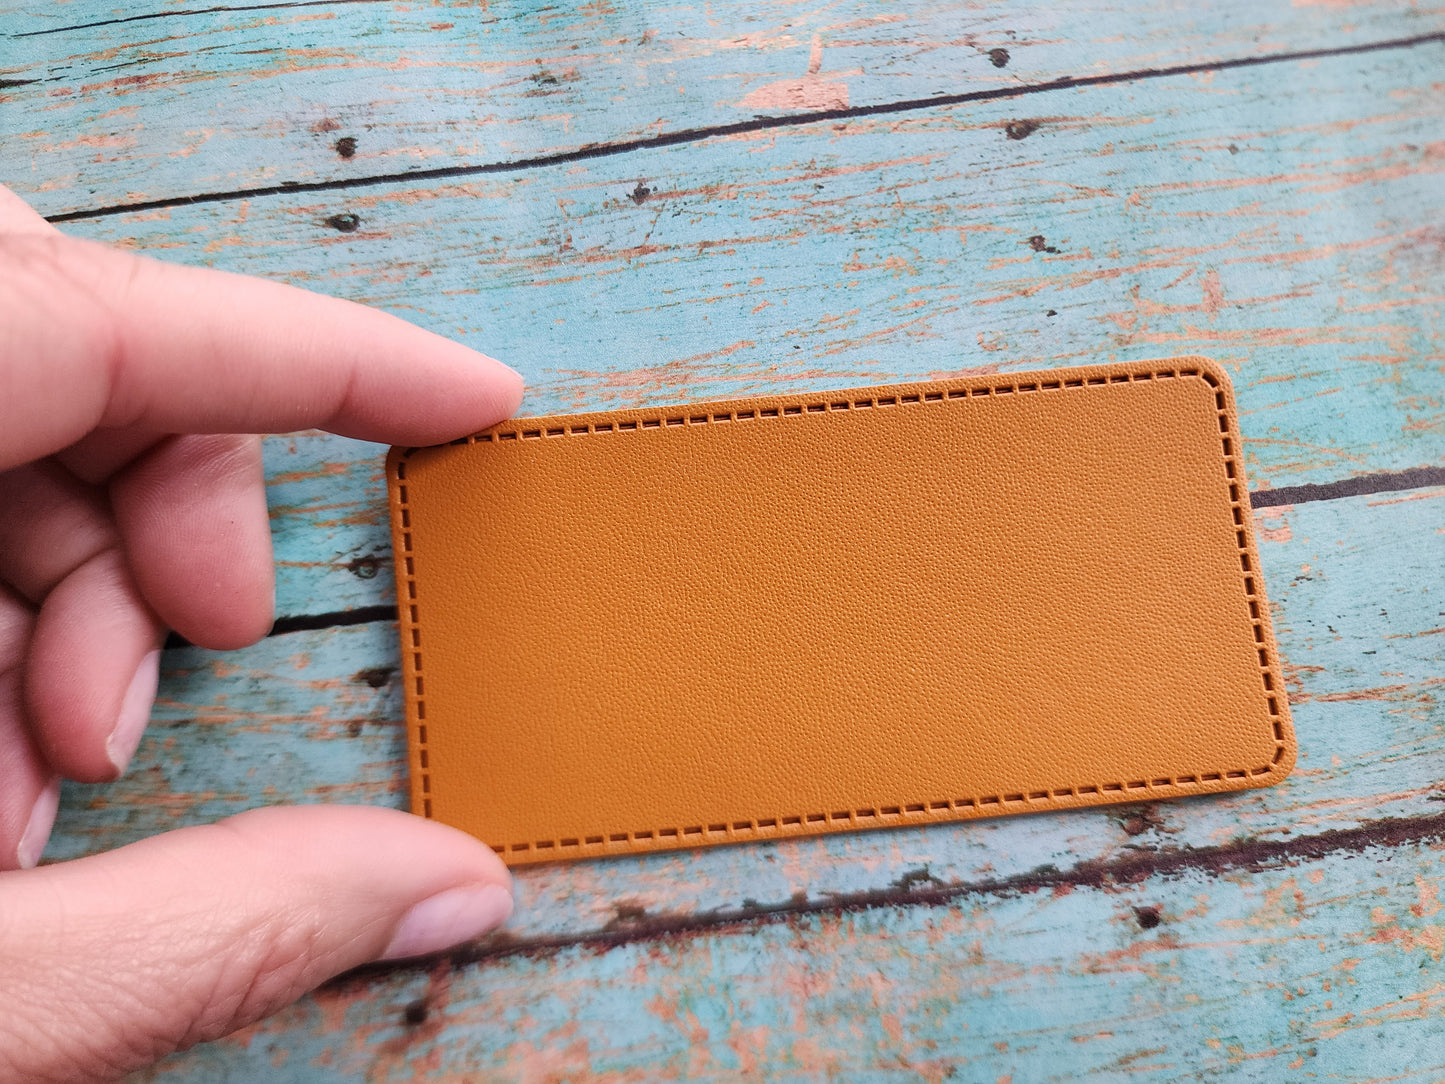 Elongated Skinny Rectangle 4" x 2" Retro Sandstone or Tan Leather Hat Patch Sublimation Blank! Laserable!